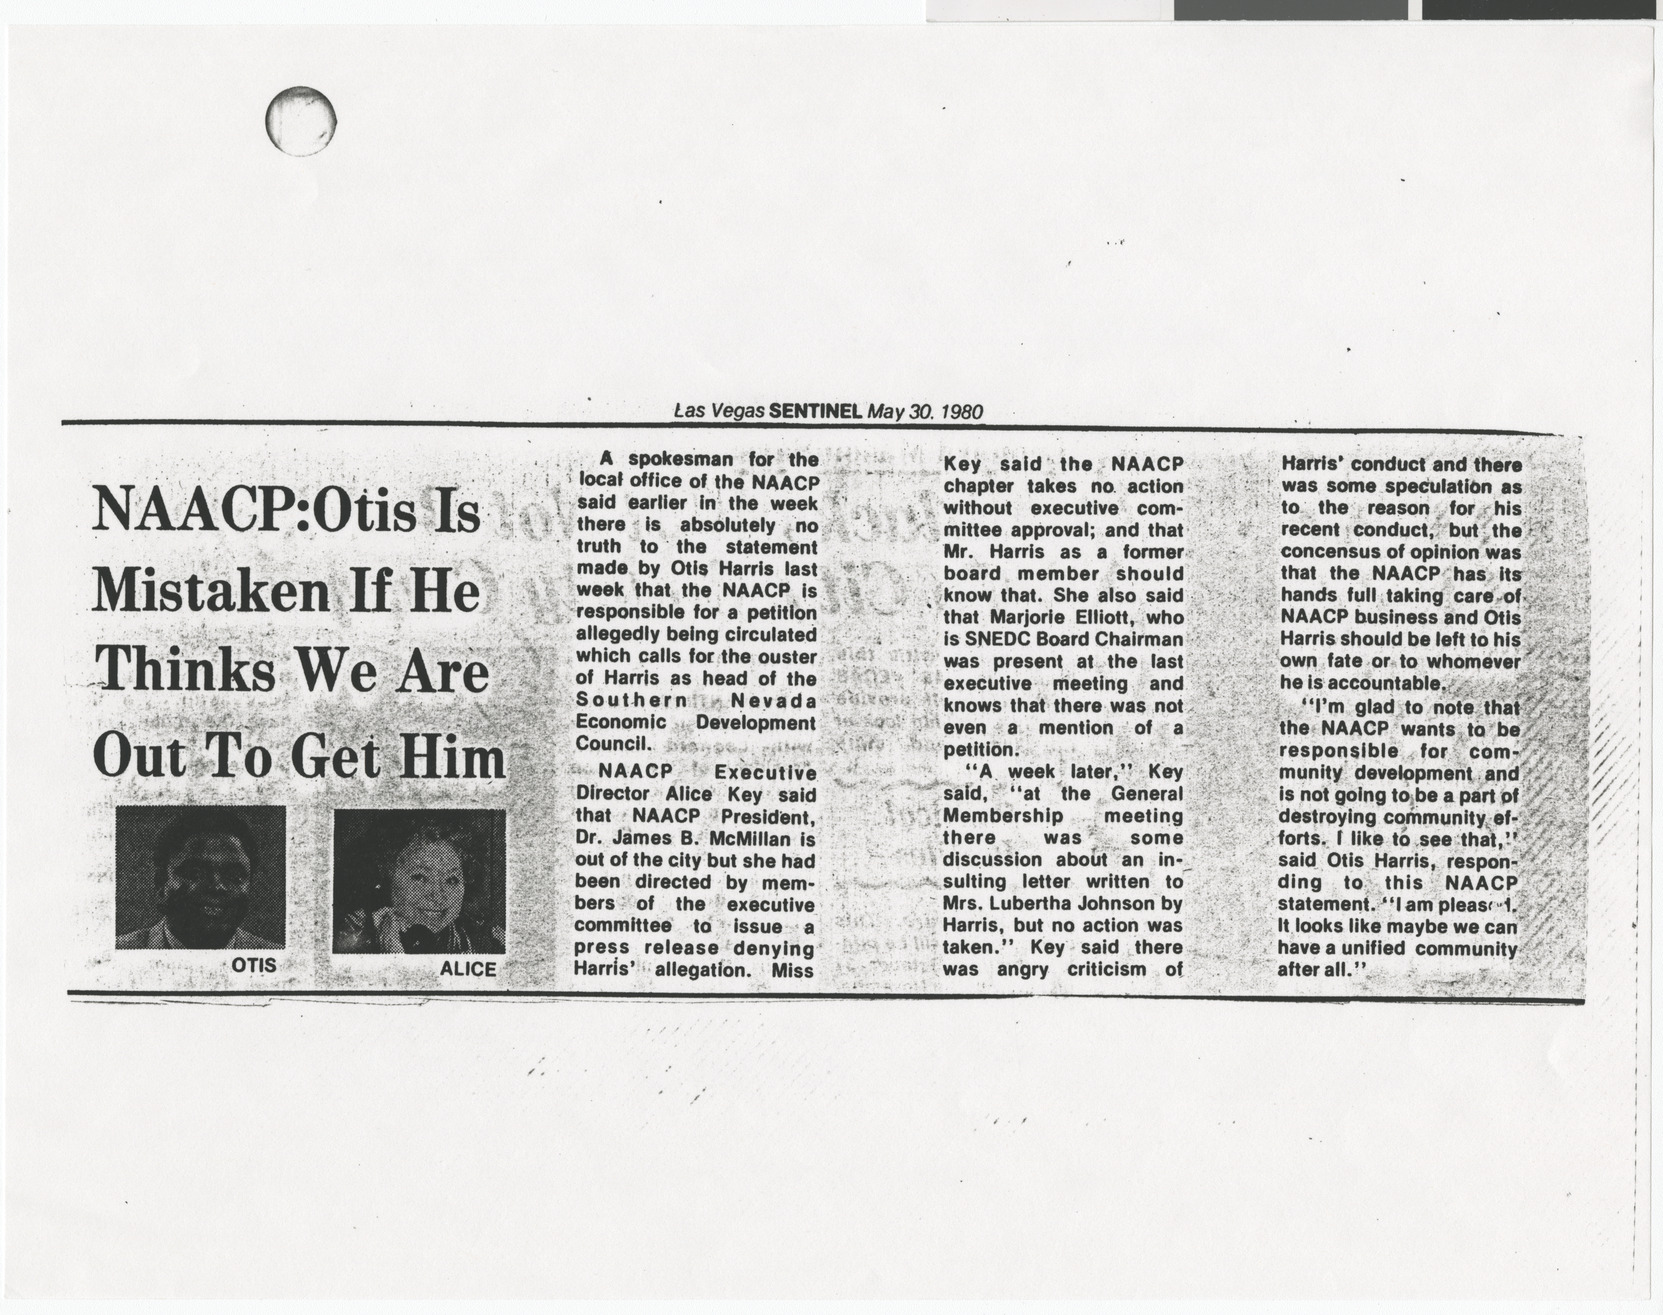 Newspaper clipping (copy), Las Vegas Sentinel, NAACP: Otis is mistaken if he thinks we are out to get him, May 30, 1980